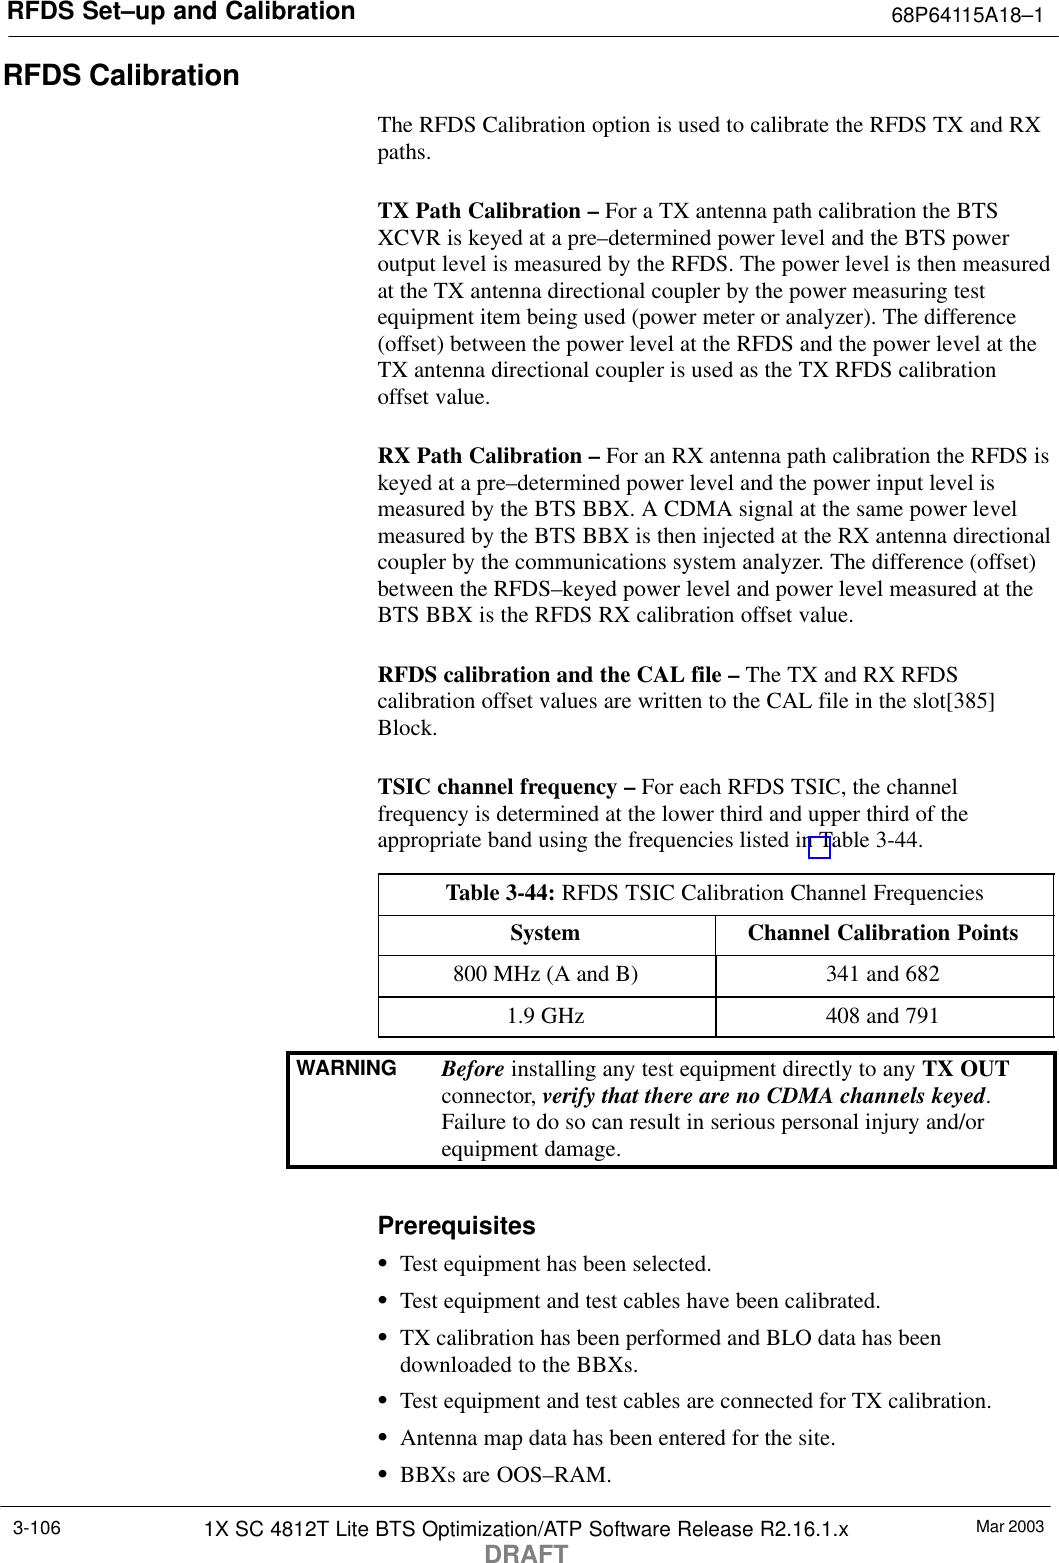 RFDS Set–up and Calibration 68P64115A18–1Mar 20031X SC 4812T Lite BTS Optimization/ATP Software Release R2.16.1.xDRAFT3-106RFDS CalibrationThe RFDS Calibration option is used to calibrate the RFDS TX and RXpaths.TX Path Calibration – For a TX antenna path calibration the BTSXCVR is keyed at a pre–determined power level and the BTS poweroutput level is measured by the RFDS. The power level is then measuredat the TX antenna directional coupler by the power measuring testequipment item being used (power meter or analyzer). The difference(offset) between the power level at the RFDS and the power level at theTX antenna directional coupler is used as the TX RFDS calibrationoffset value.RX Path Calibration – For an RX antenna path calibration the RFDS iskeyed at a pre–determined power level and the power input level ismeasured by the BTS BBX. A CDMA signal at the same power levelmeasured by the BTS BBX is then injected at the RX antenna directionalcoupler by the communications system analyzer. The difference (offset)between the RFDS–keyed power level and power level measured at theBTS BBX is the RFDS RX calibration offset value.RFDS calibration and the CAL file – The TX and RX RFDScalibration offset values are written to the CAL file in the slot[385]Block.TSIC channel frequency – For each RFDS TSIC, the channelfrequency is determined at the lower third and upper third of theappropriate band using the frequencies listed in Table 3-44.Table 3-44: RFDS TSIC Calibration Channel FrequenciesSystem Channel Calibration Points800 MHz (A and B) 341 and 6821.9 GHz 408 and 791WARNING Before installing any test equipment directly to any TX OUTconnector, verify that there are no CDMA channels keyed.Failure to do so can result in serious personal injury and/orequipment damage.PrerequisitesSTest equipment has been selected.STest equipment and test cables have been calibrated.STX calibration has been performed and BLO data has beendownloaded to the BBXs.STest equipment and test cables are connected for TX calibration.SAntenna map data has been entered for the site.SBBXs are OOS–RAM.